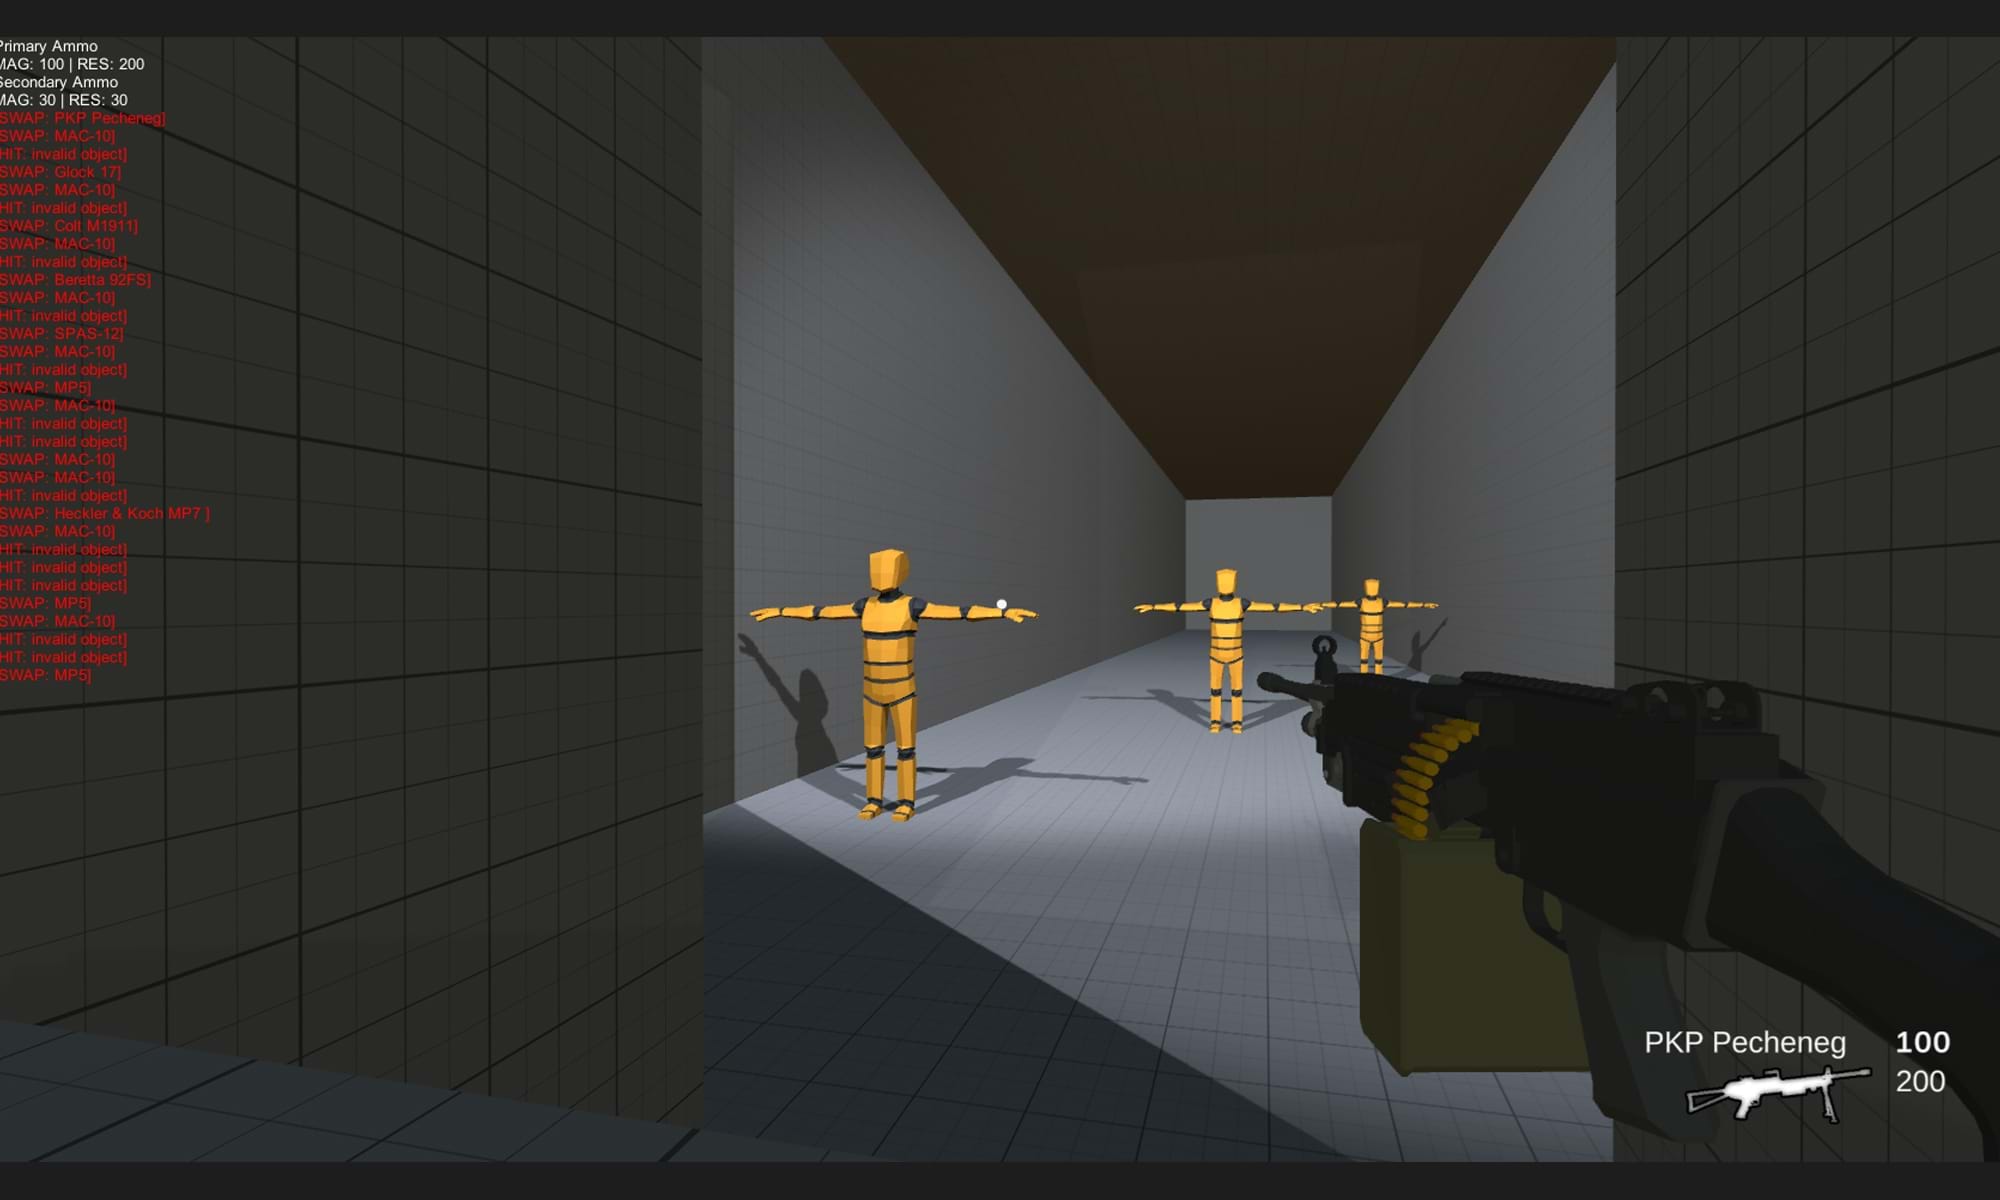 'USING ORTHOGONAL UNIT DIFFERENTIATION TO DESIGN TOOLS FOR WEAPON BALANCING IN FIRST-PERSON SHOOTER GAMES' is a 2023 Digital Graduate Show project by Morgan Skillicorn, a Games Design and Production student at Abertay University.